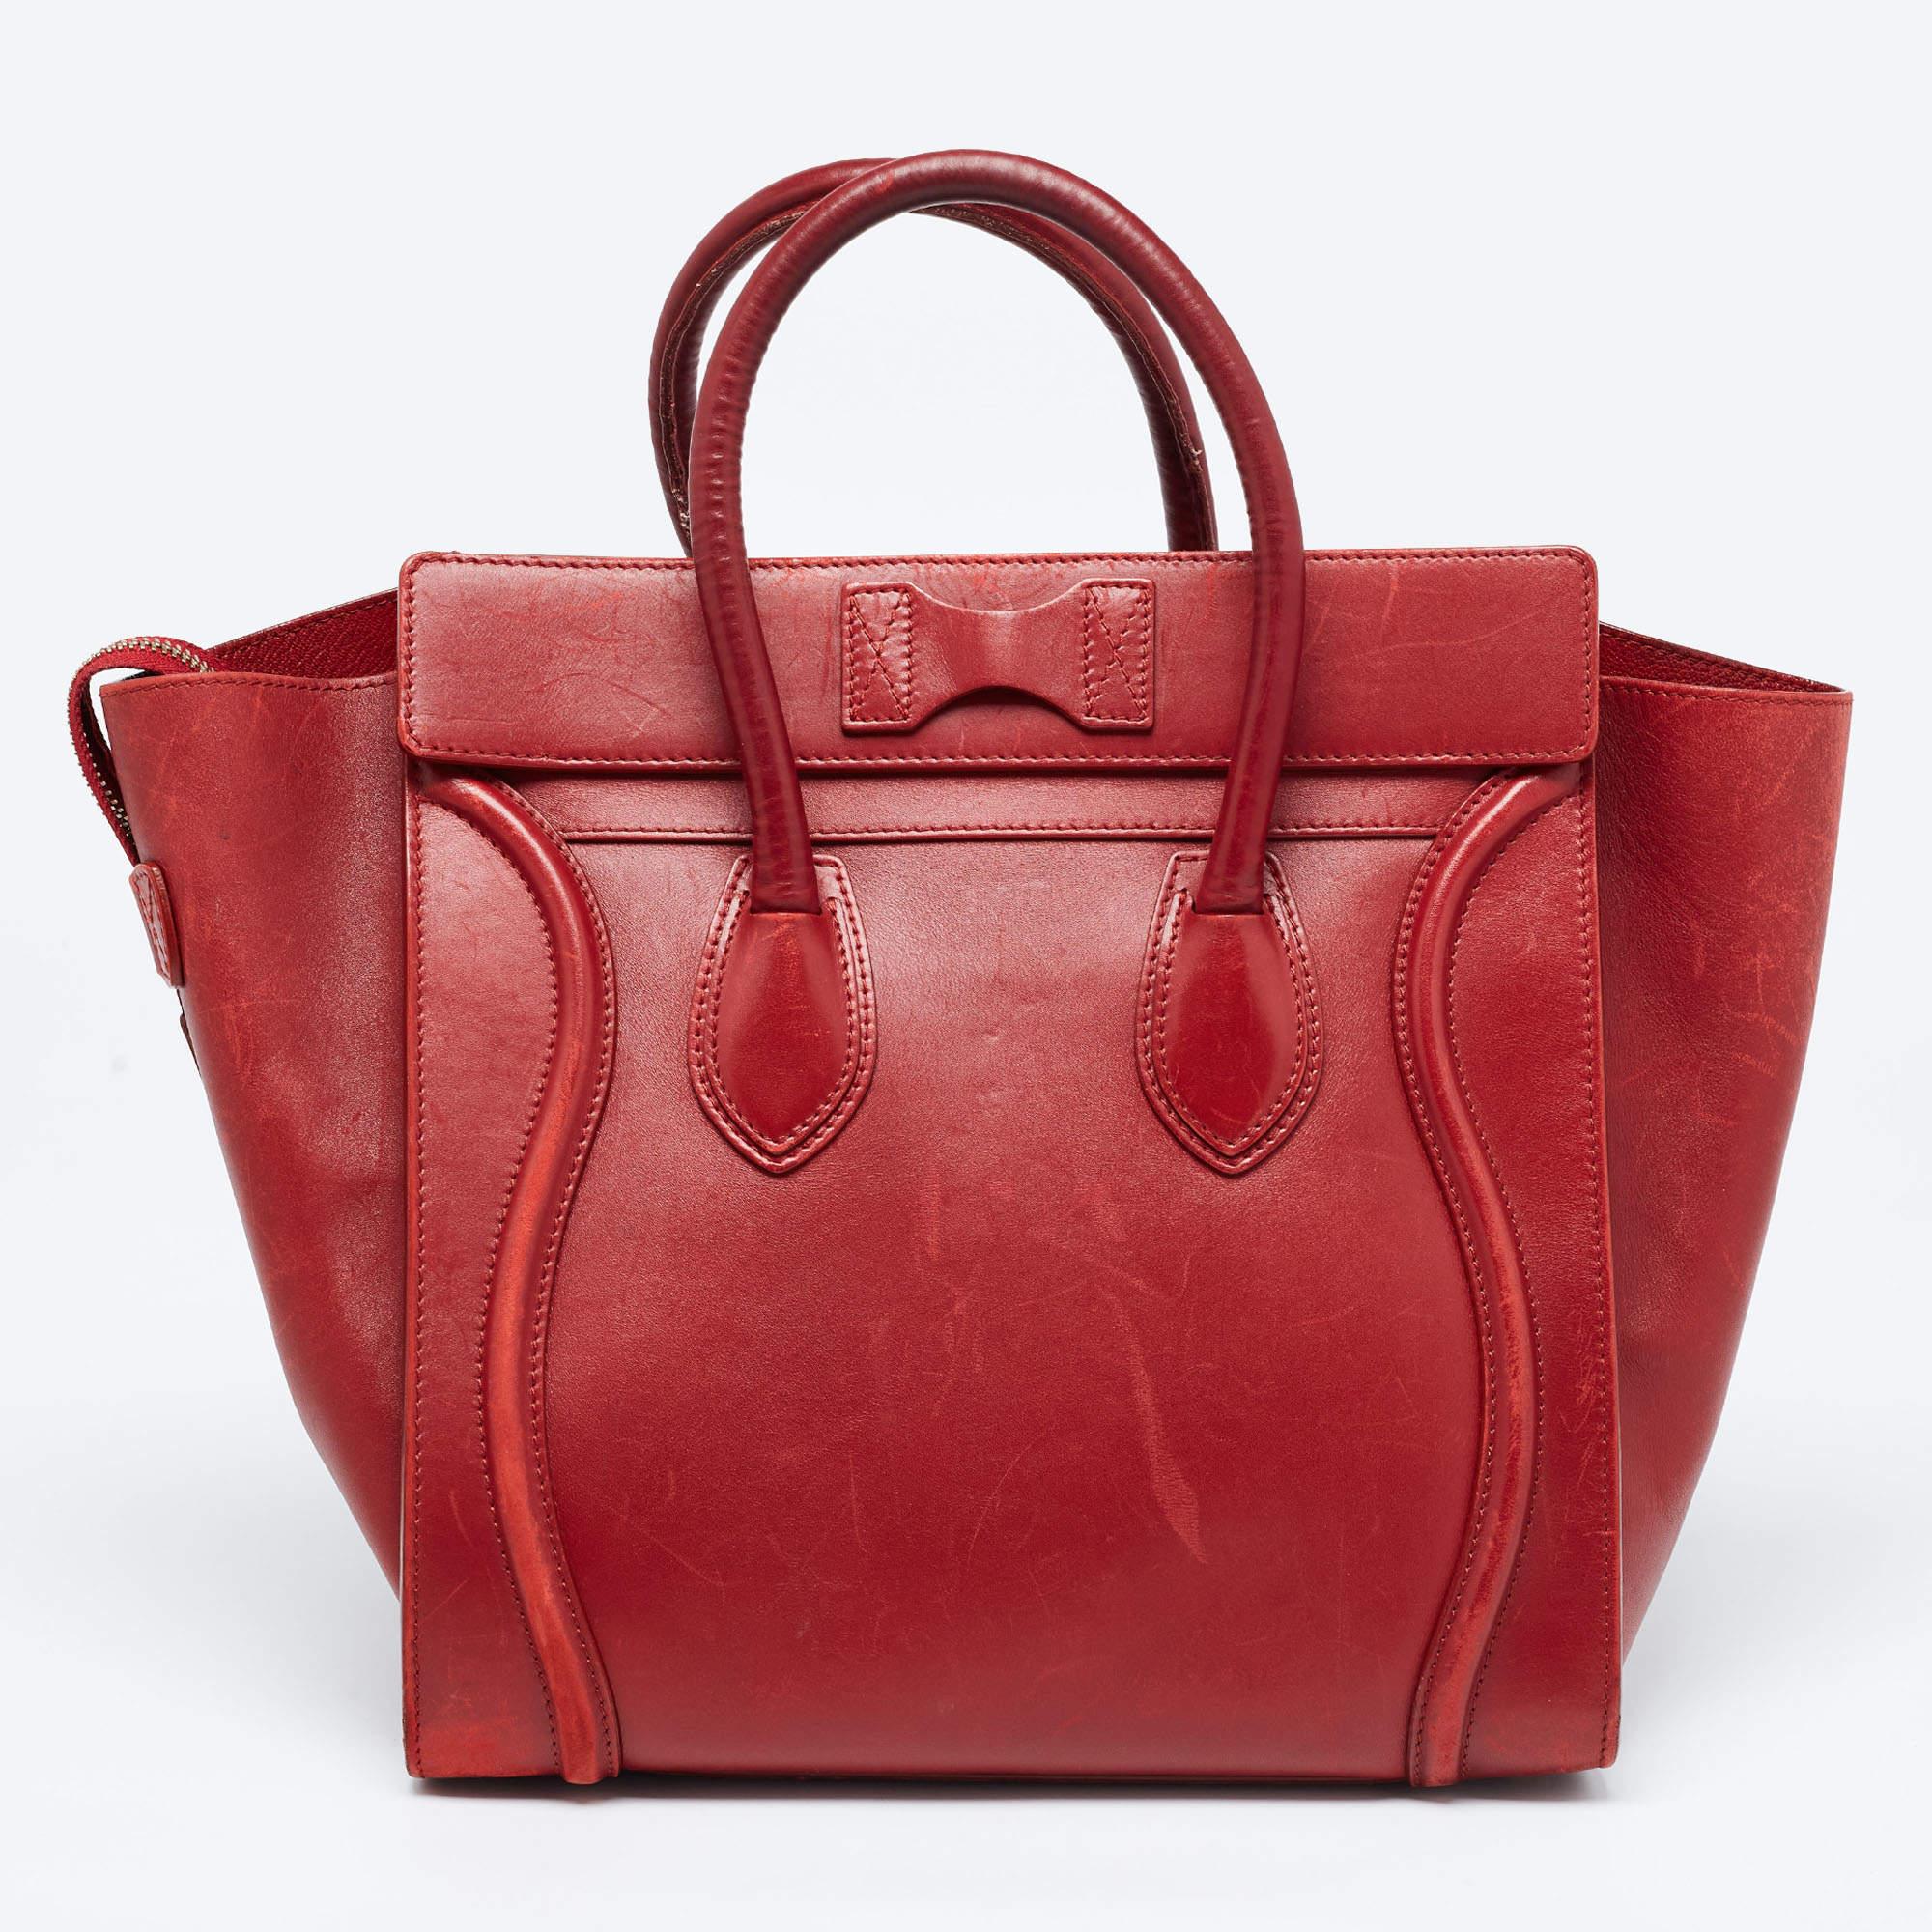 Women's Celine Red Leather Mini Luggage Tote